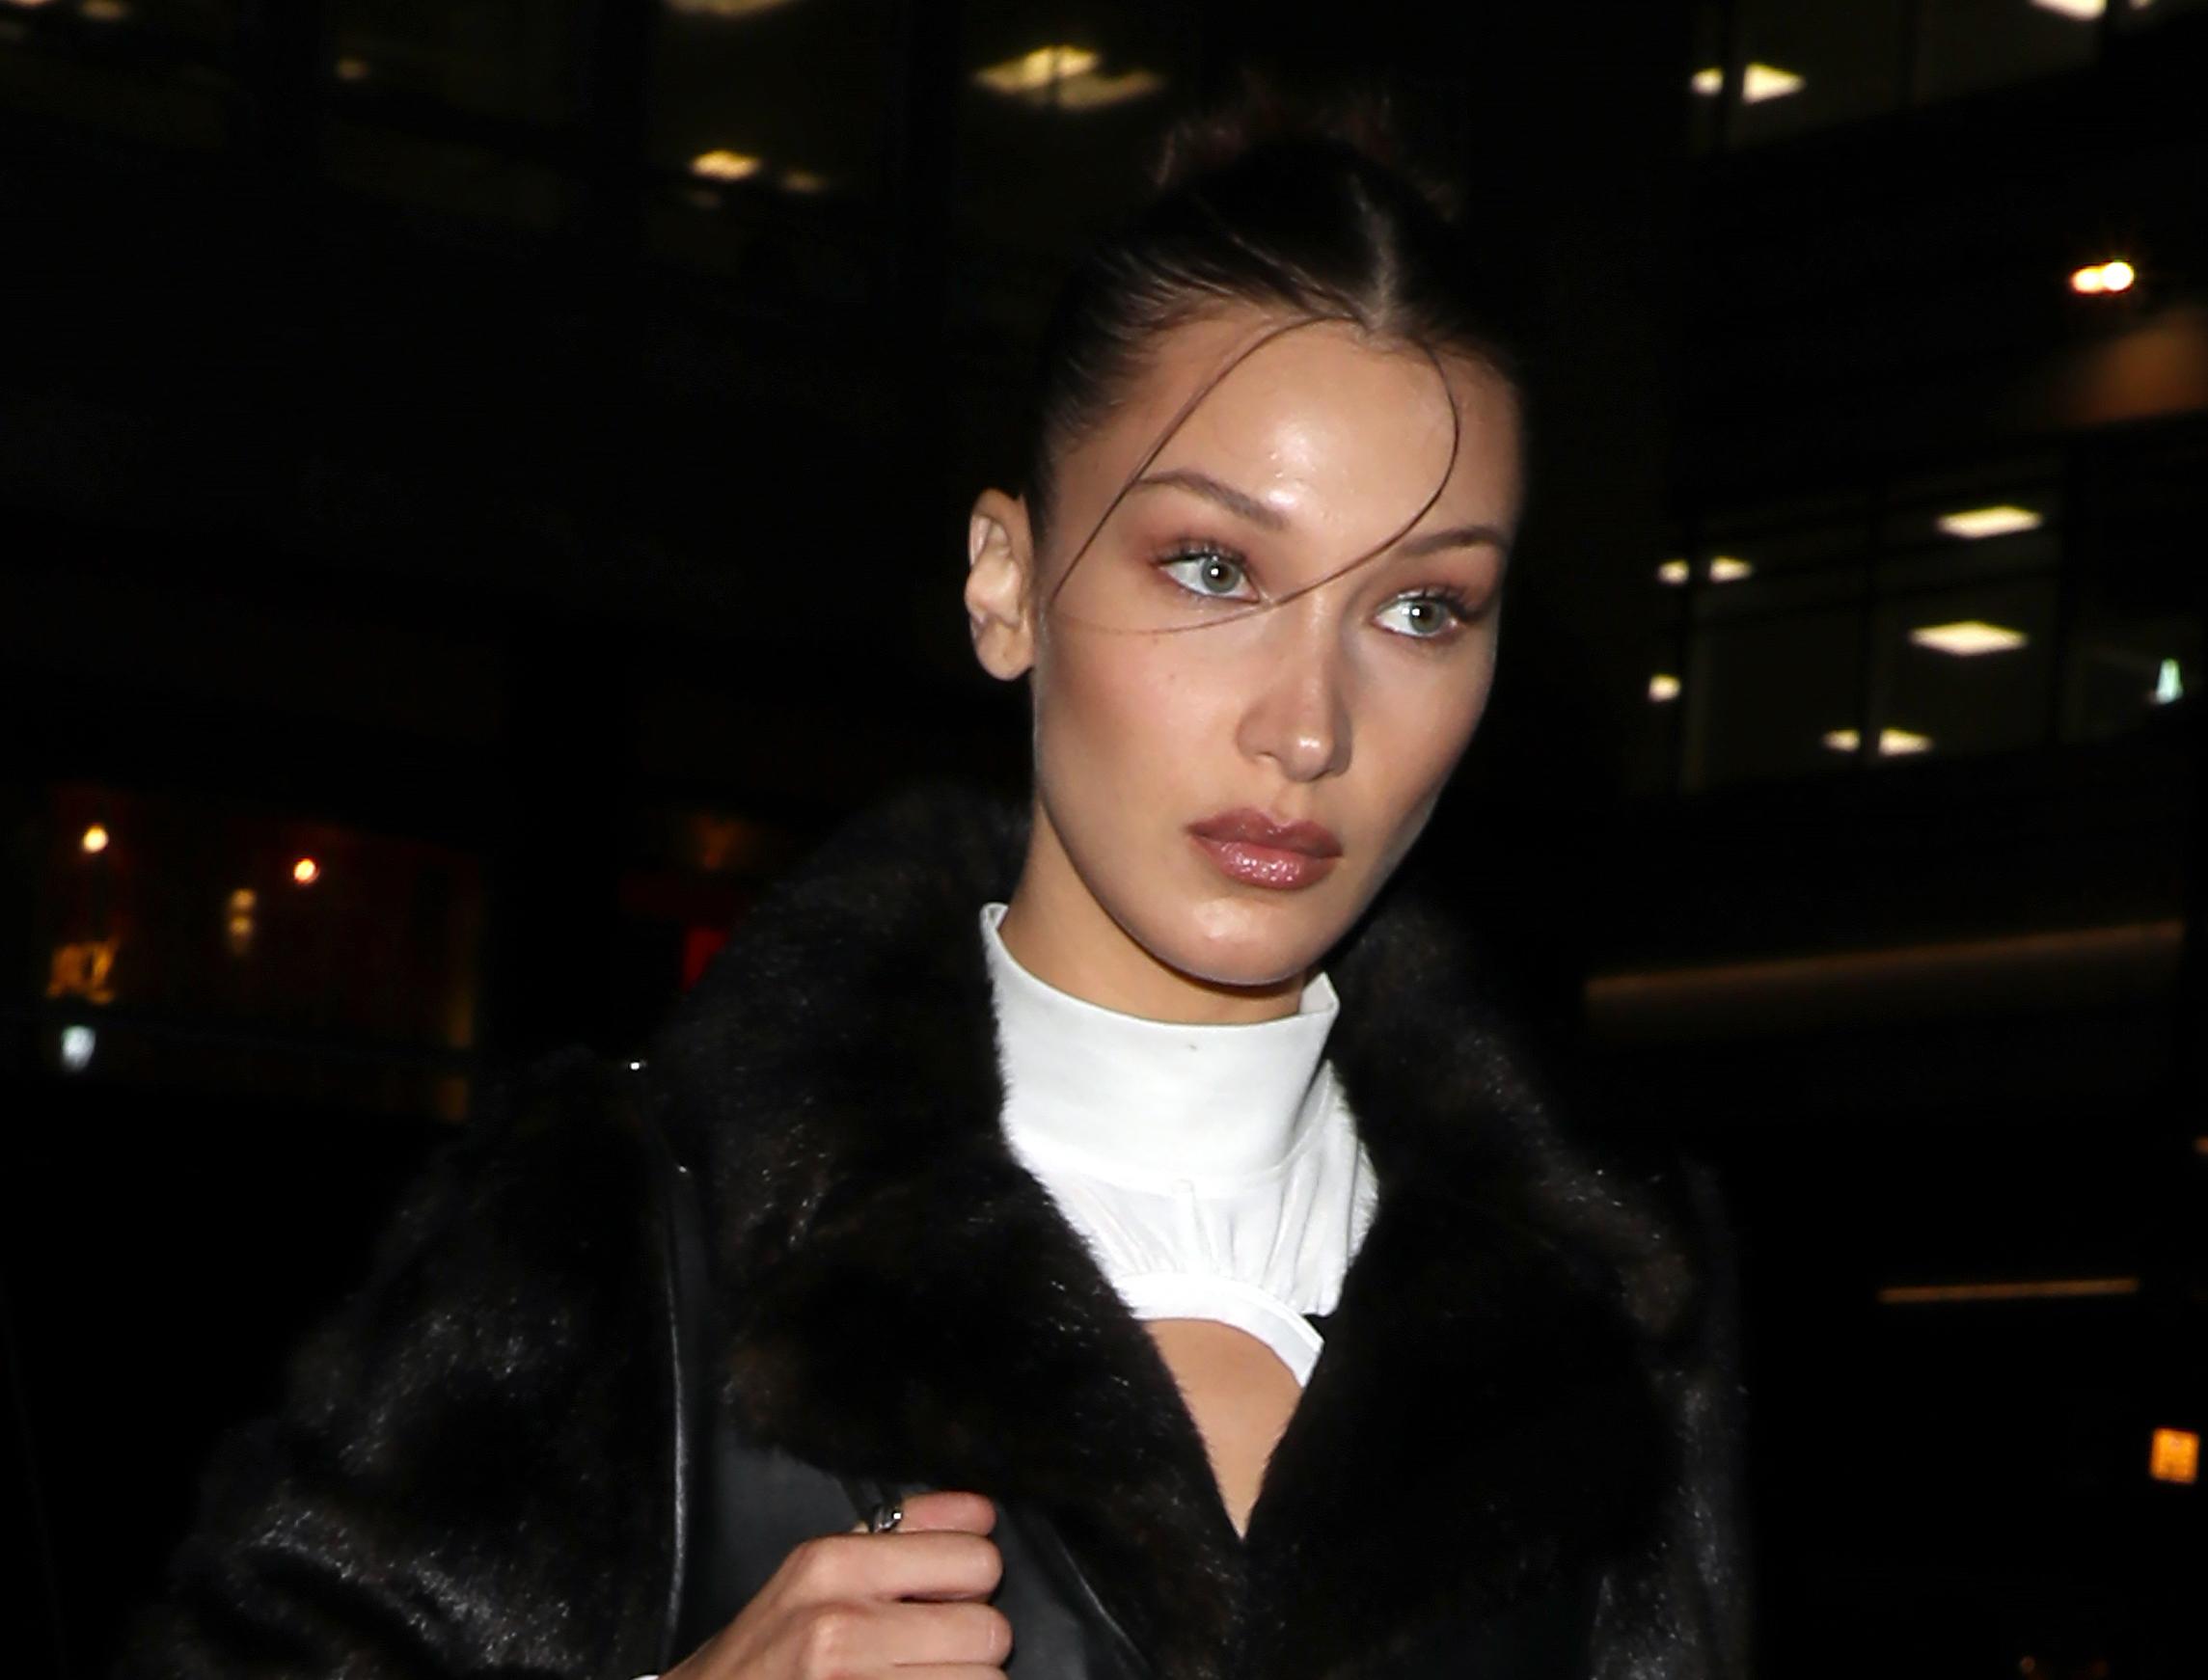 does bella hadid have a boyfriend right now or is